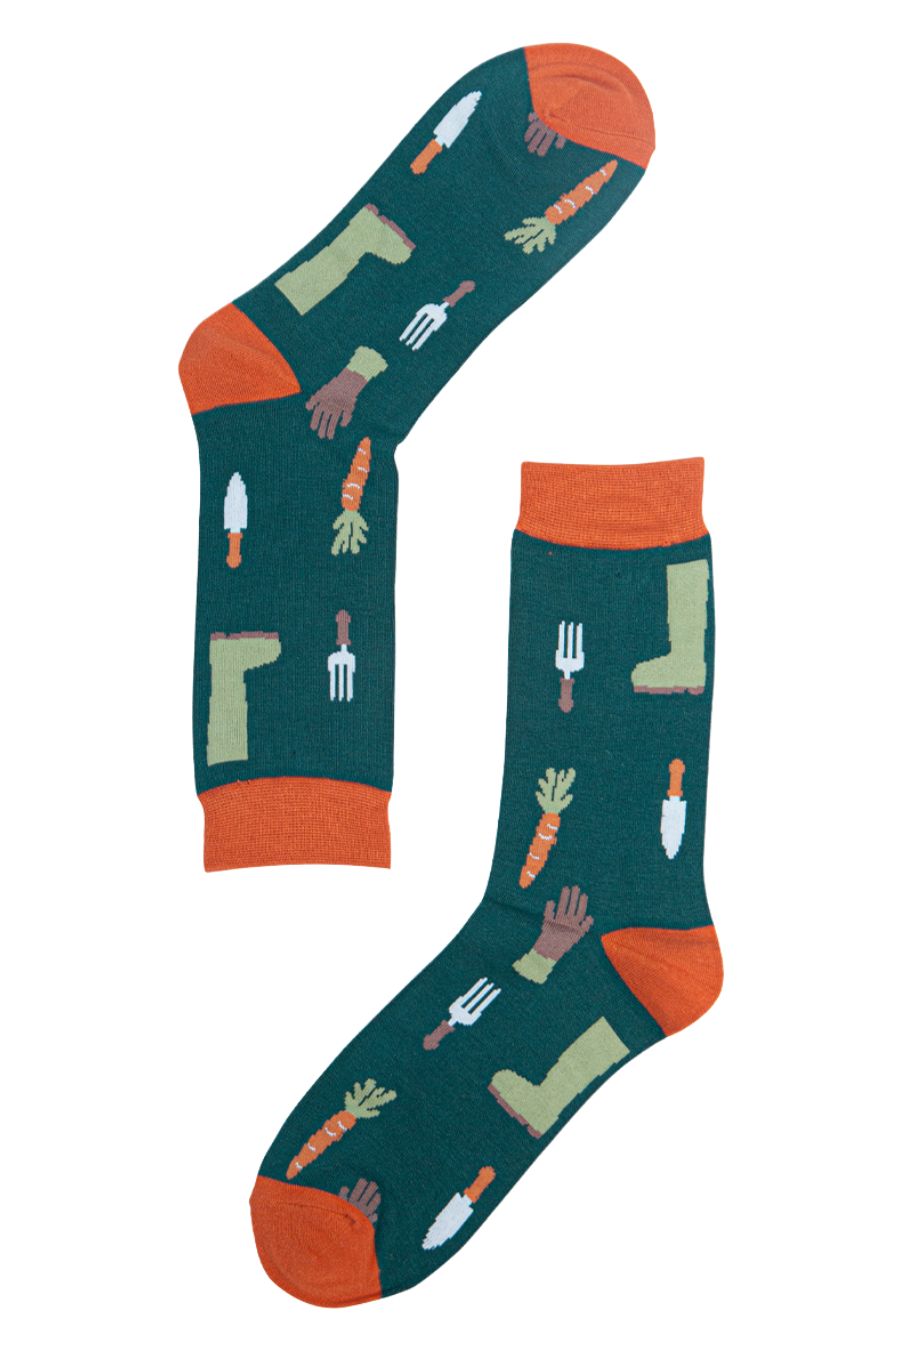 green, orange bamboo socks with gardening tools, carrots, gloves and boots